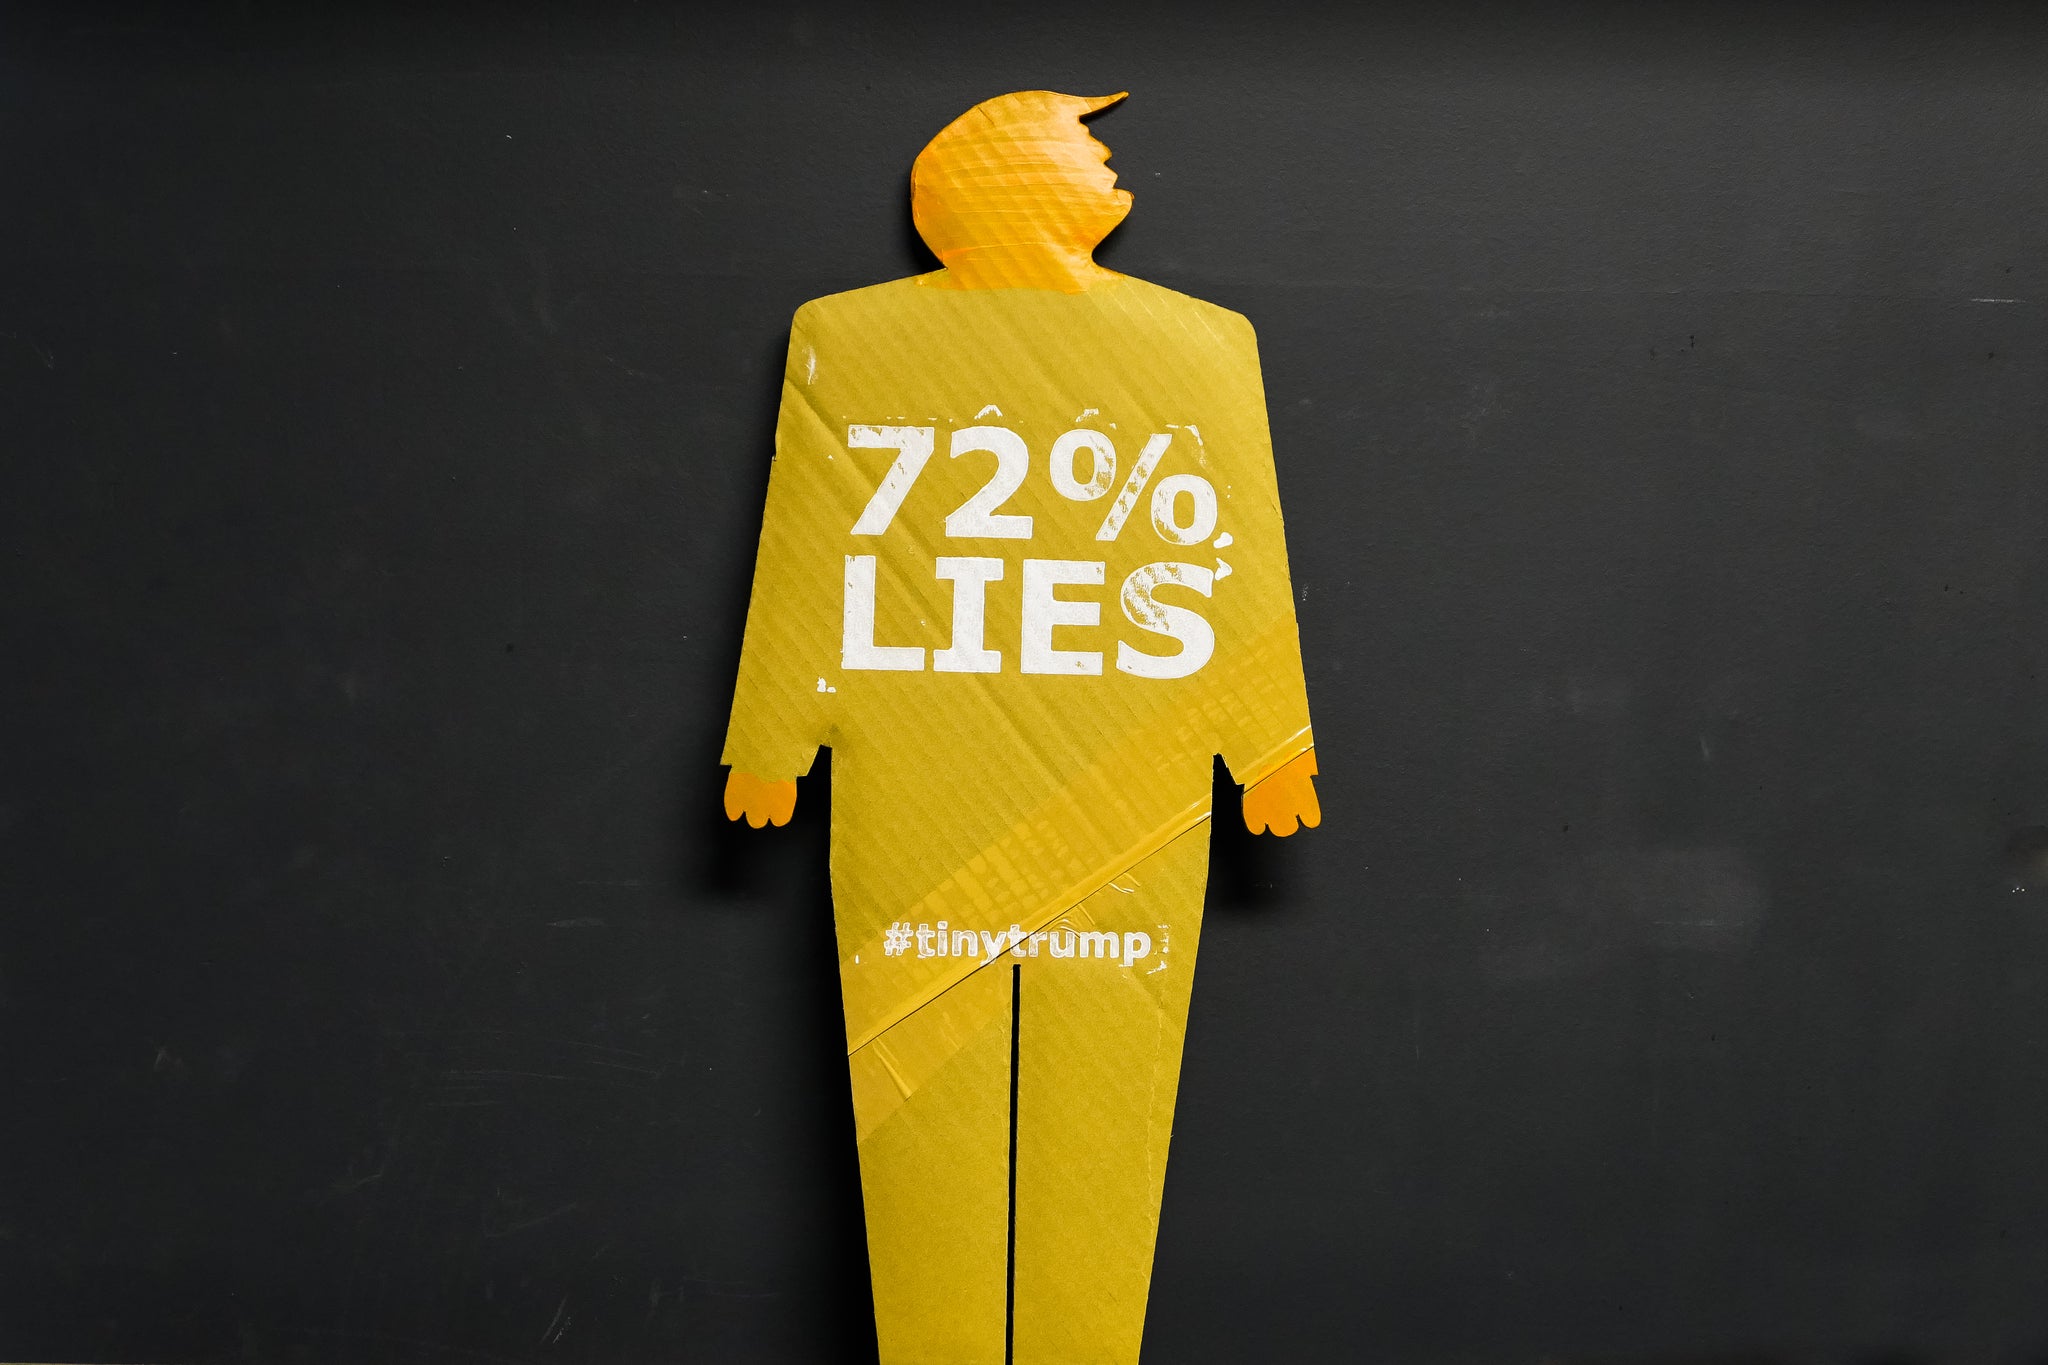 A two foot tall, cardboard tiny trump with the slogan "72% Lies"